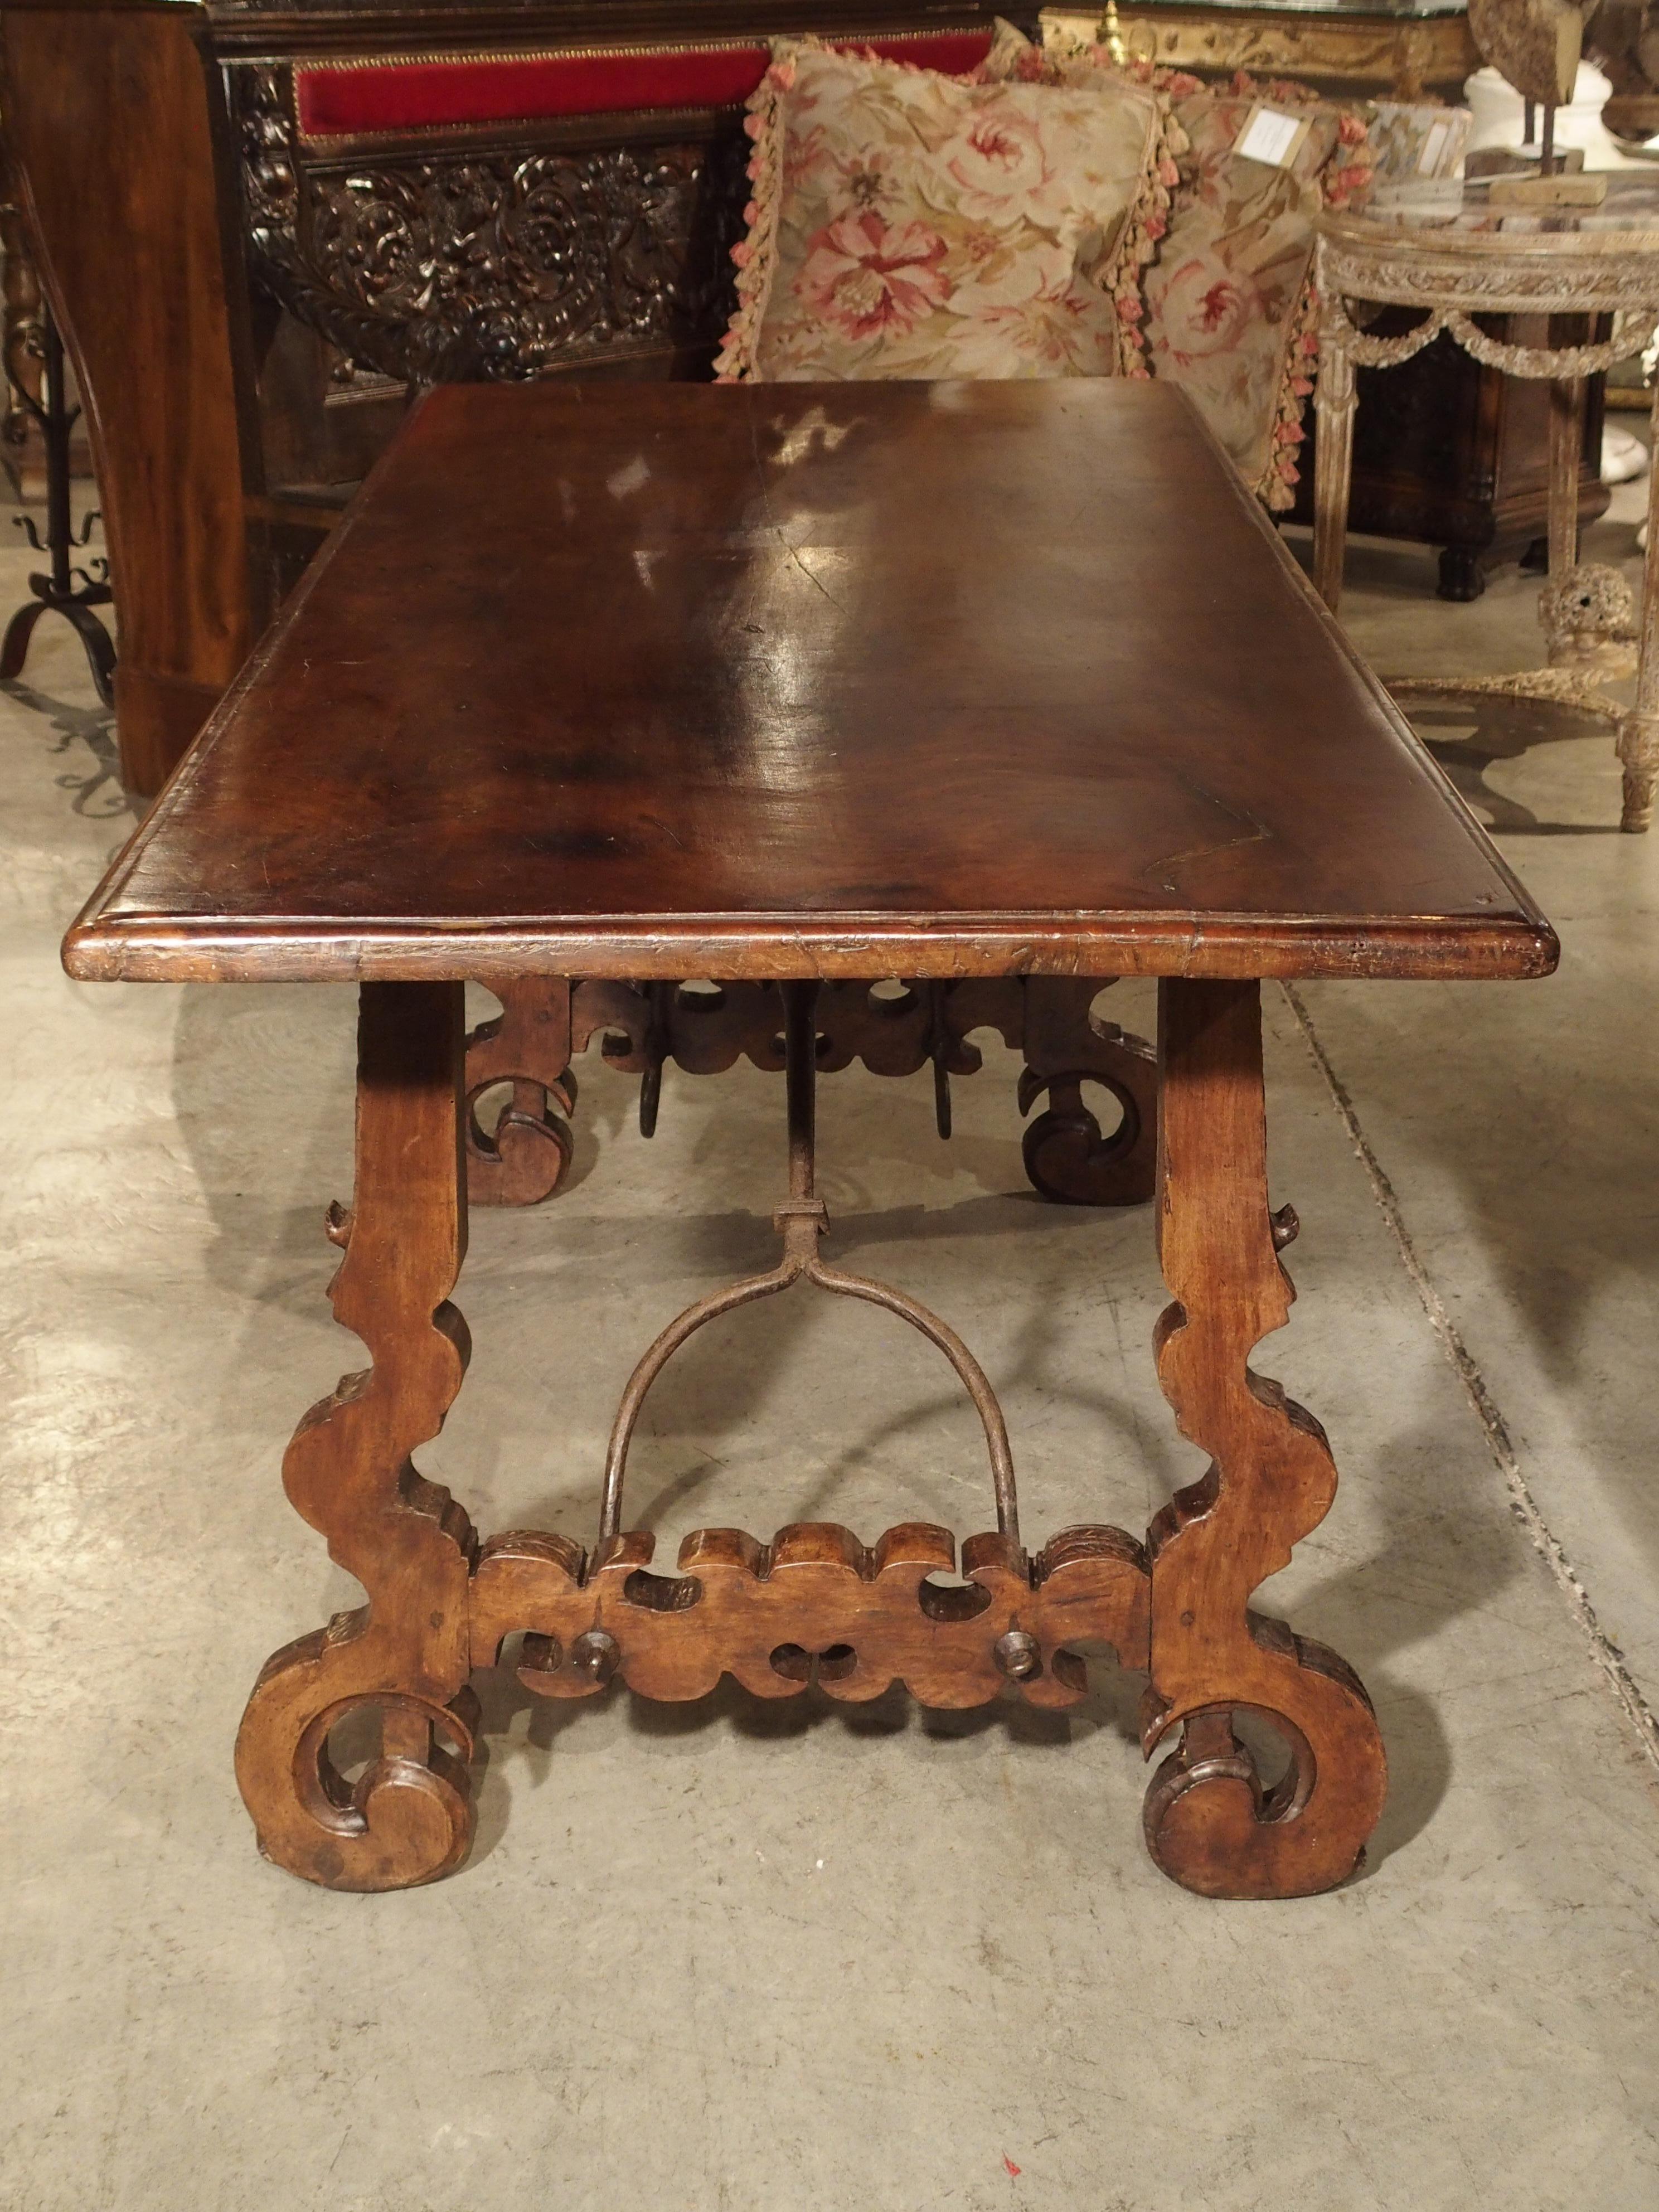 19th Century Antique Walnut and Iron Table from Spain, circa 1800